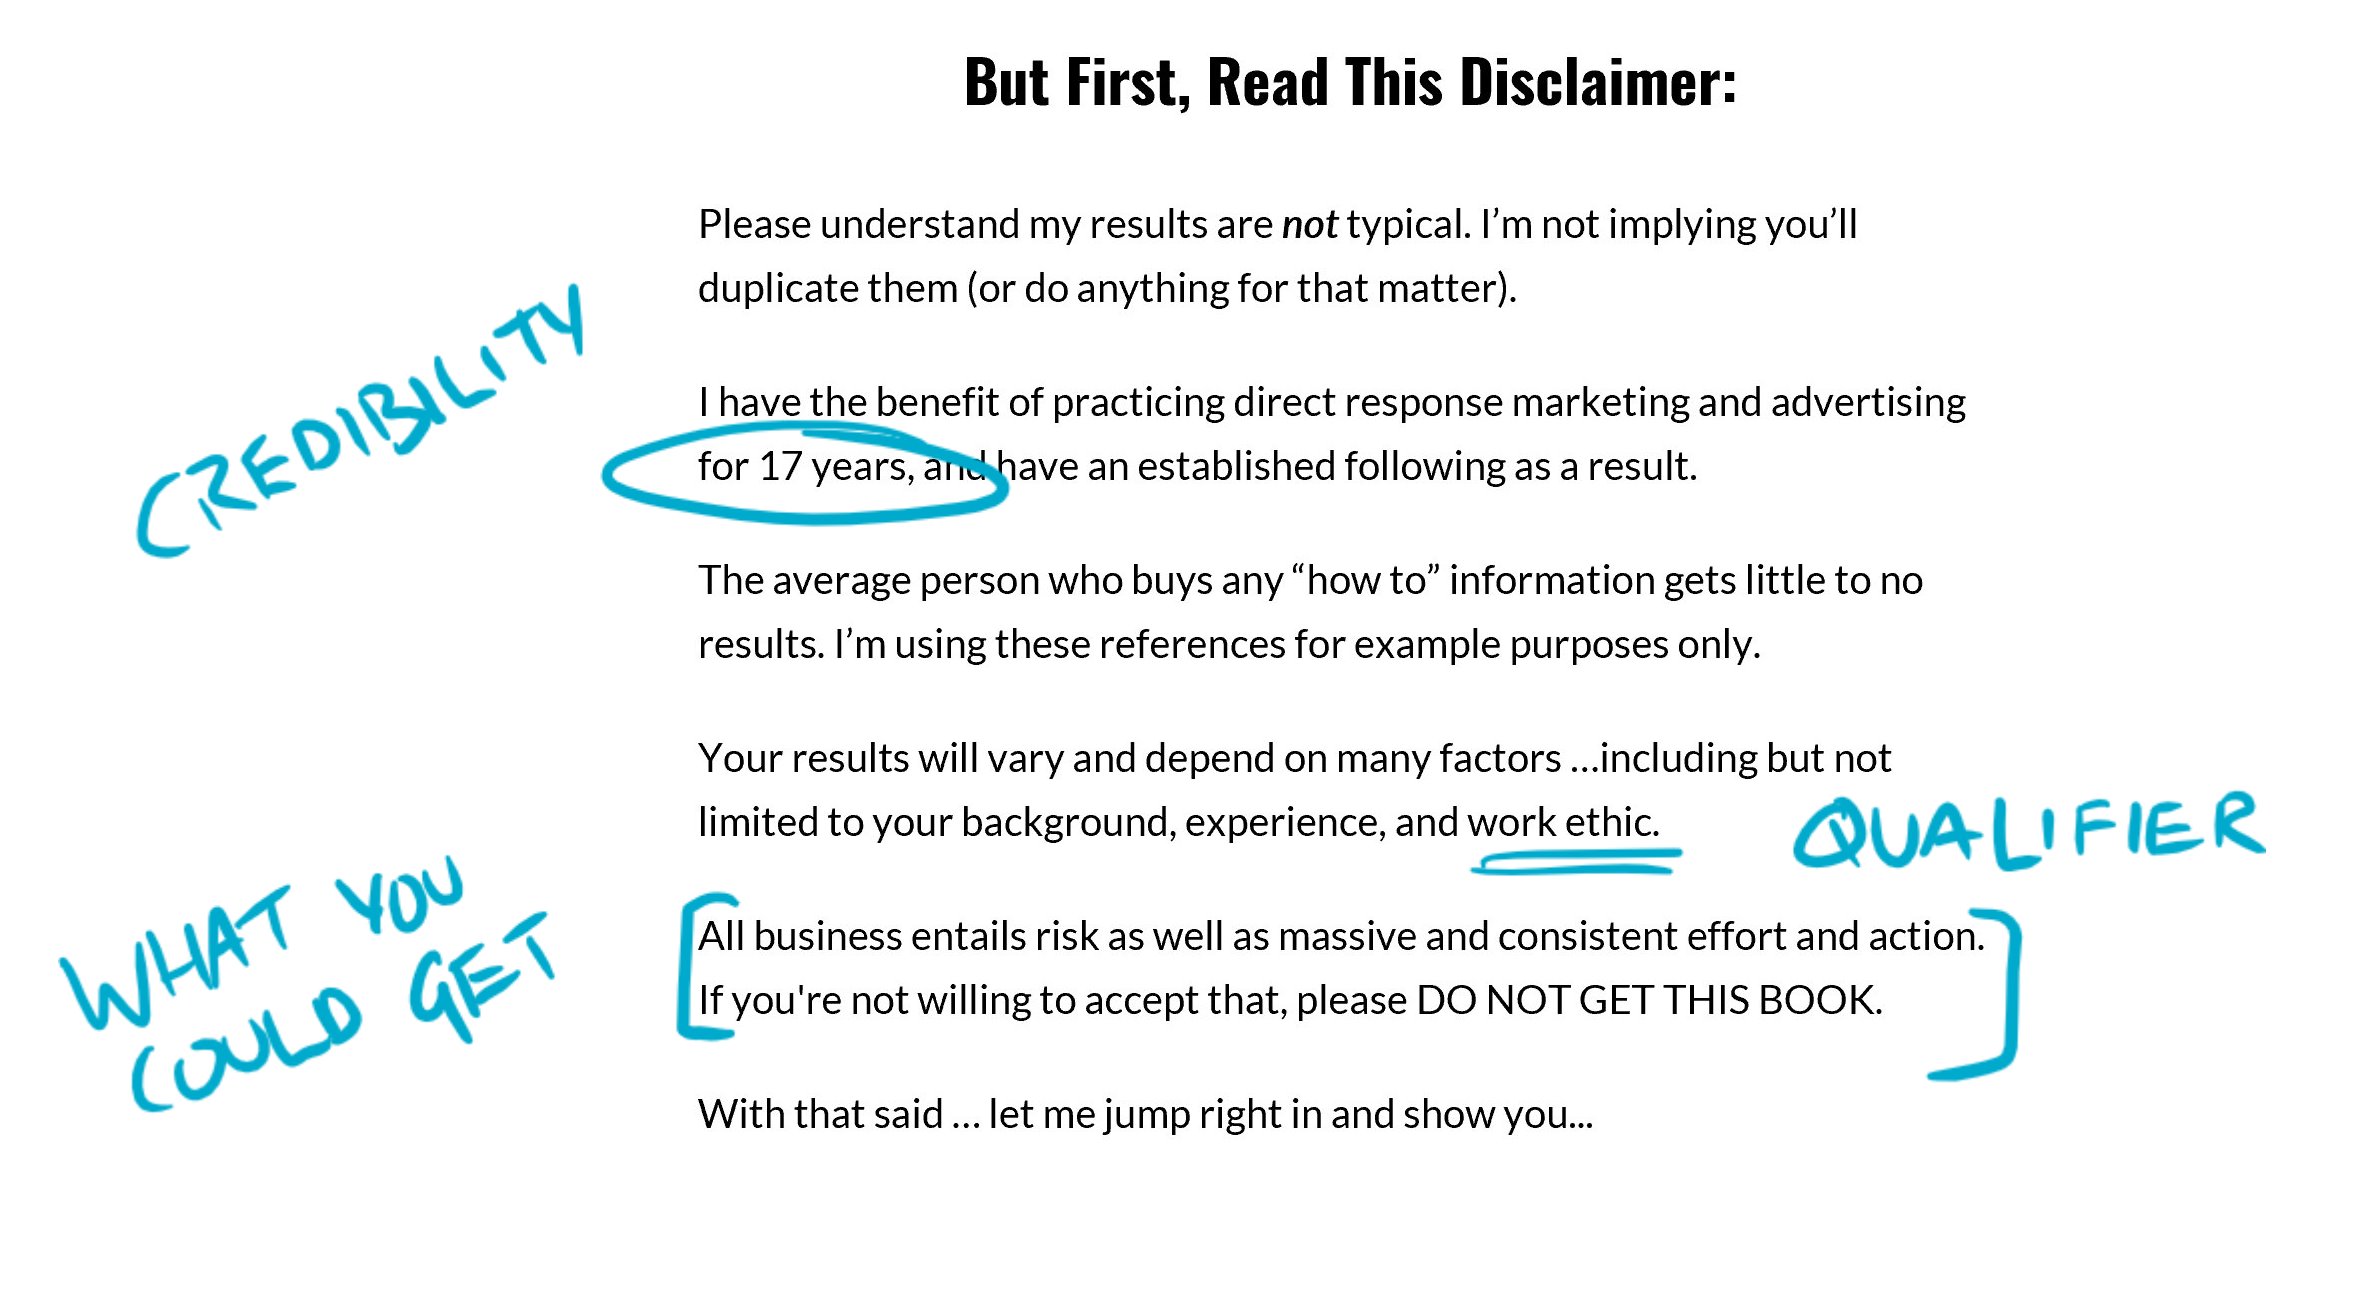 How To Copy A 1 Million Sales Letter From Frank Kern Sell Your